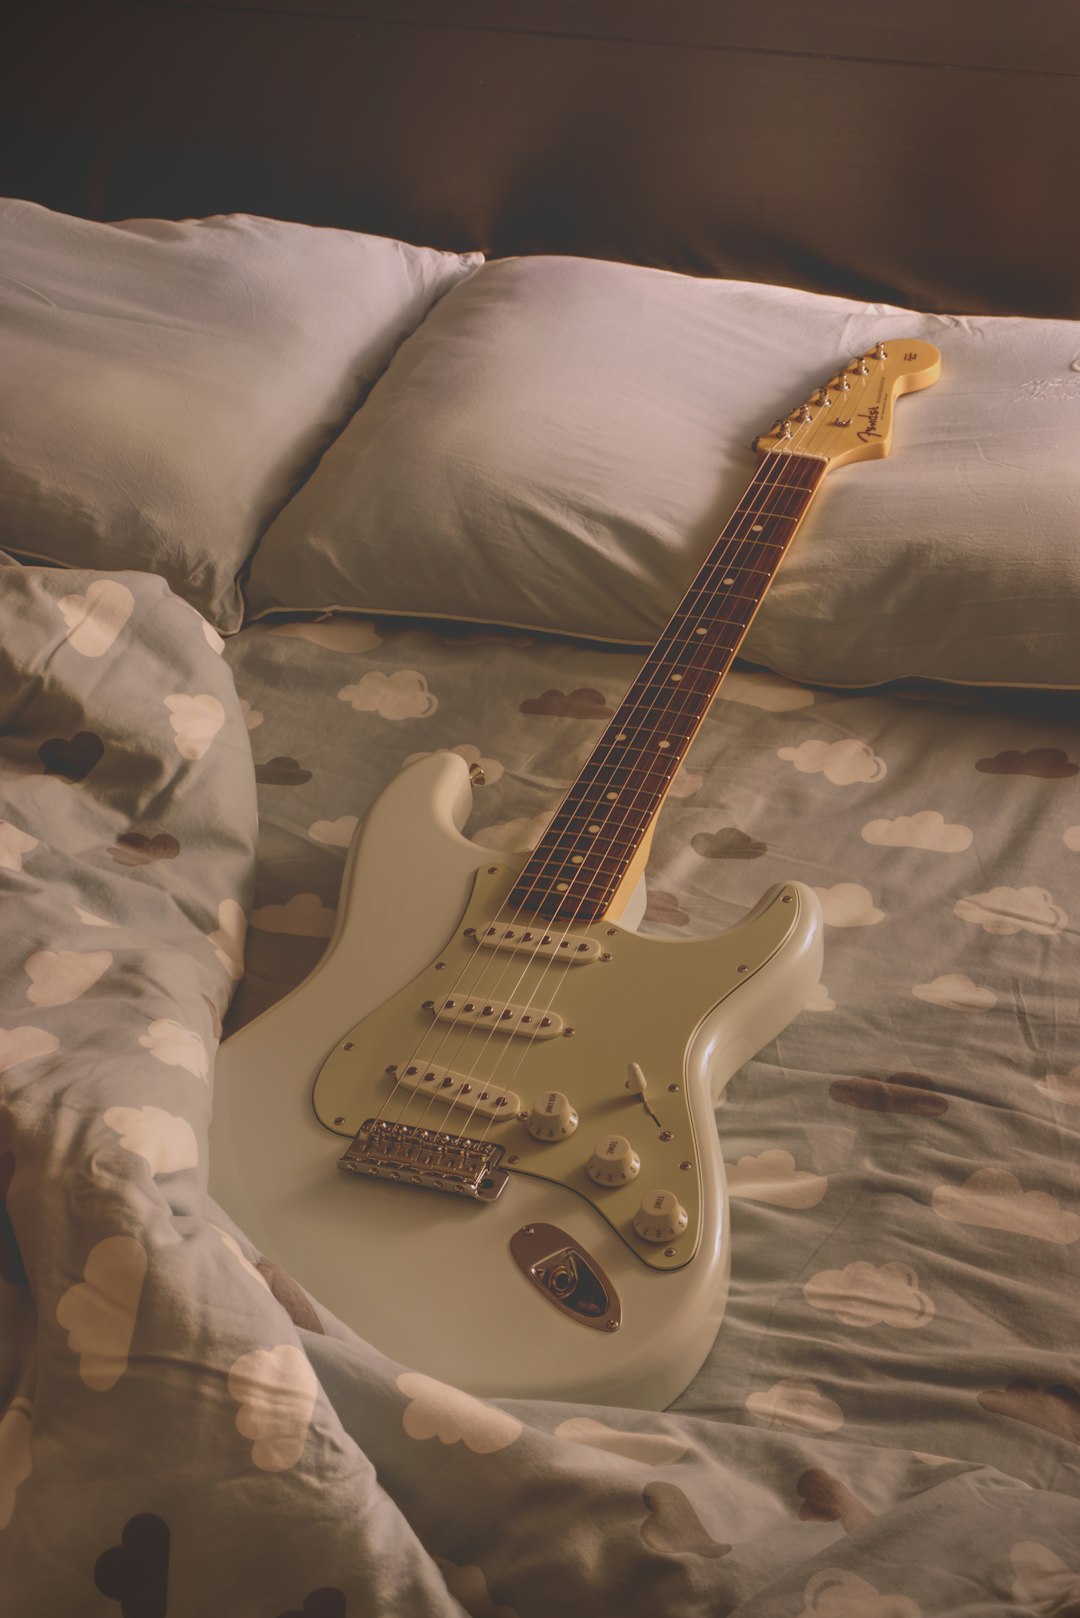 white and brown stratocaster electric guitar on white textile